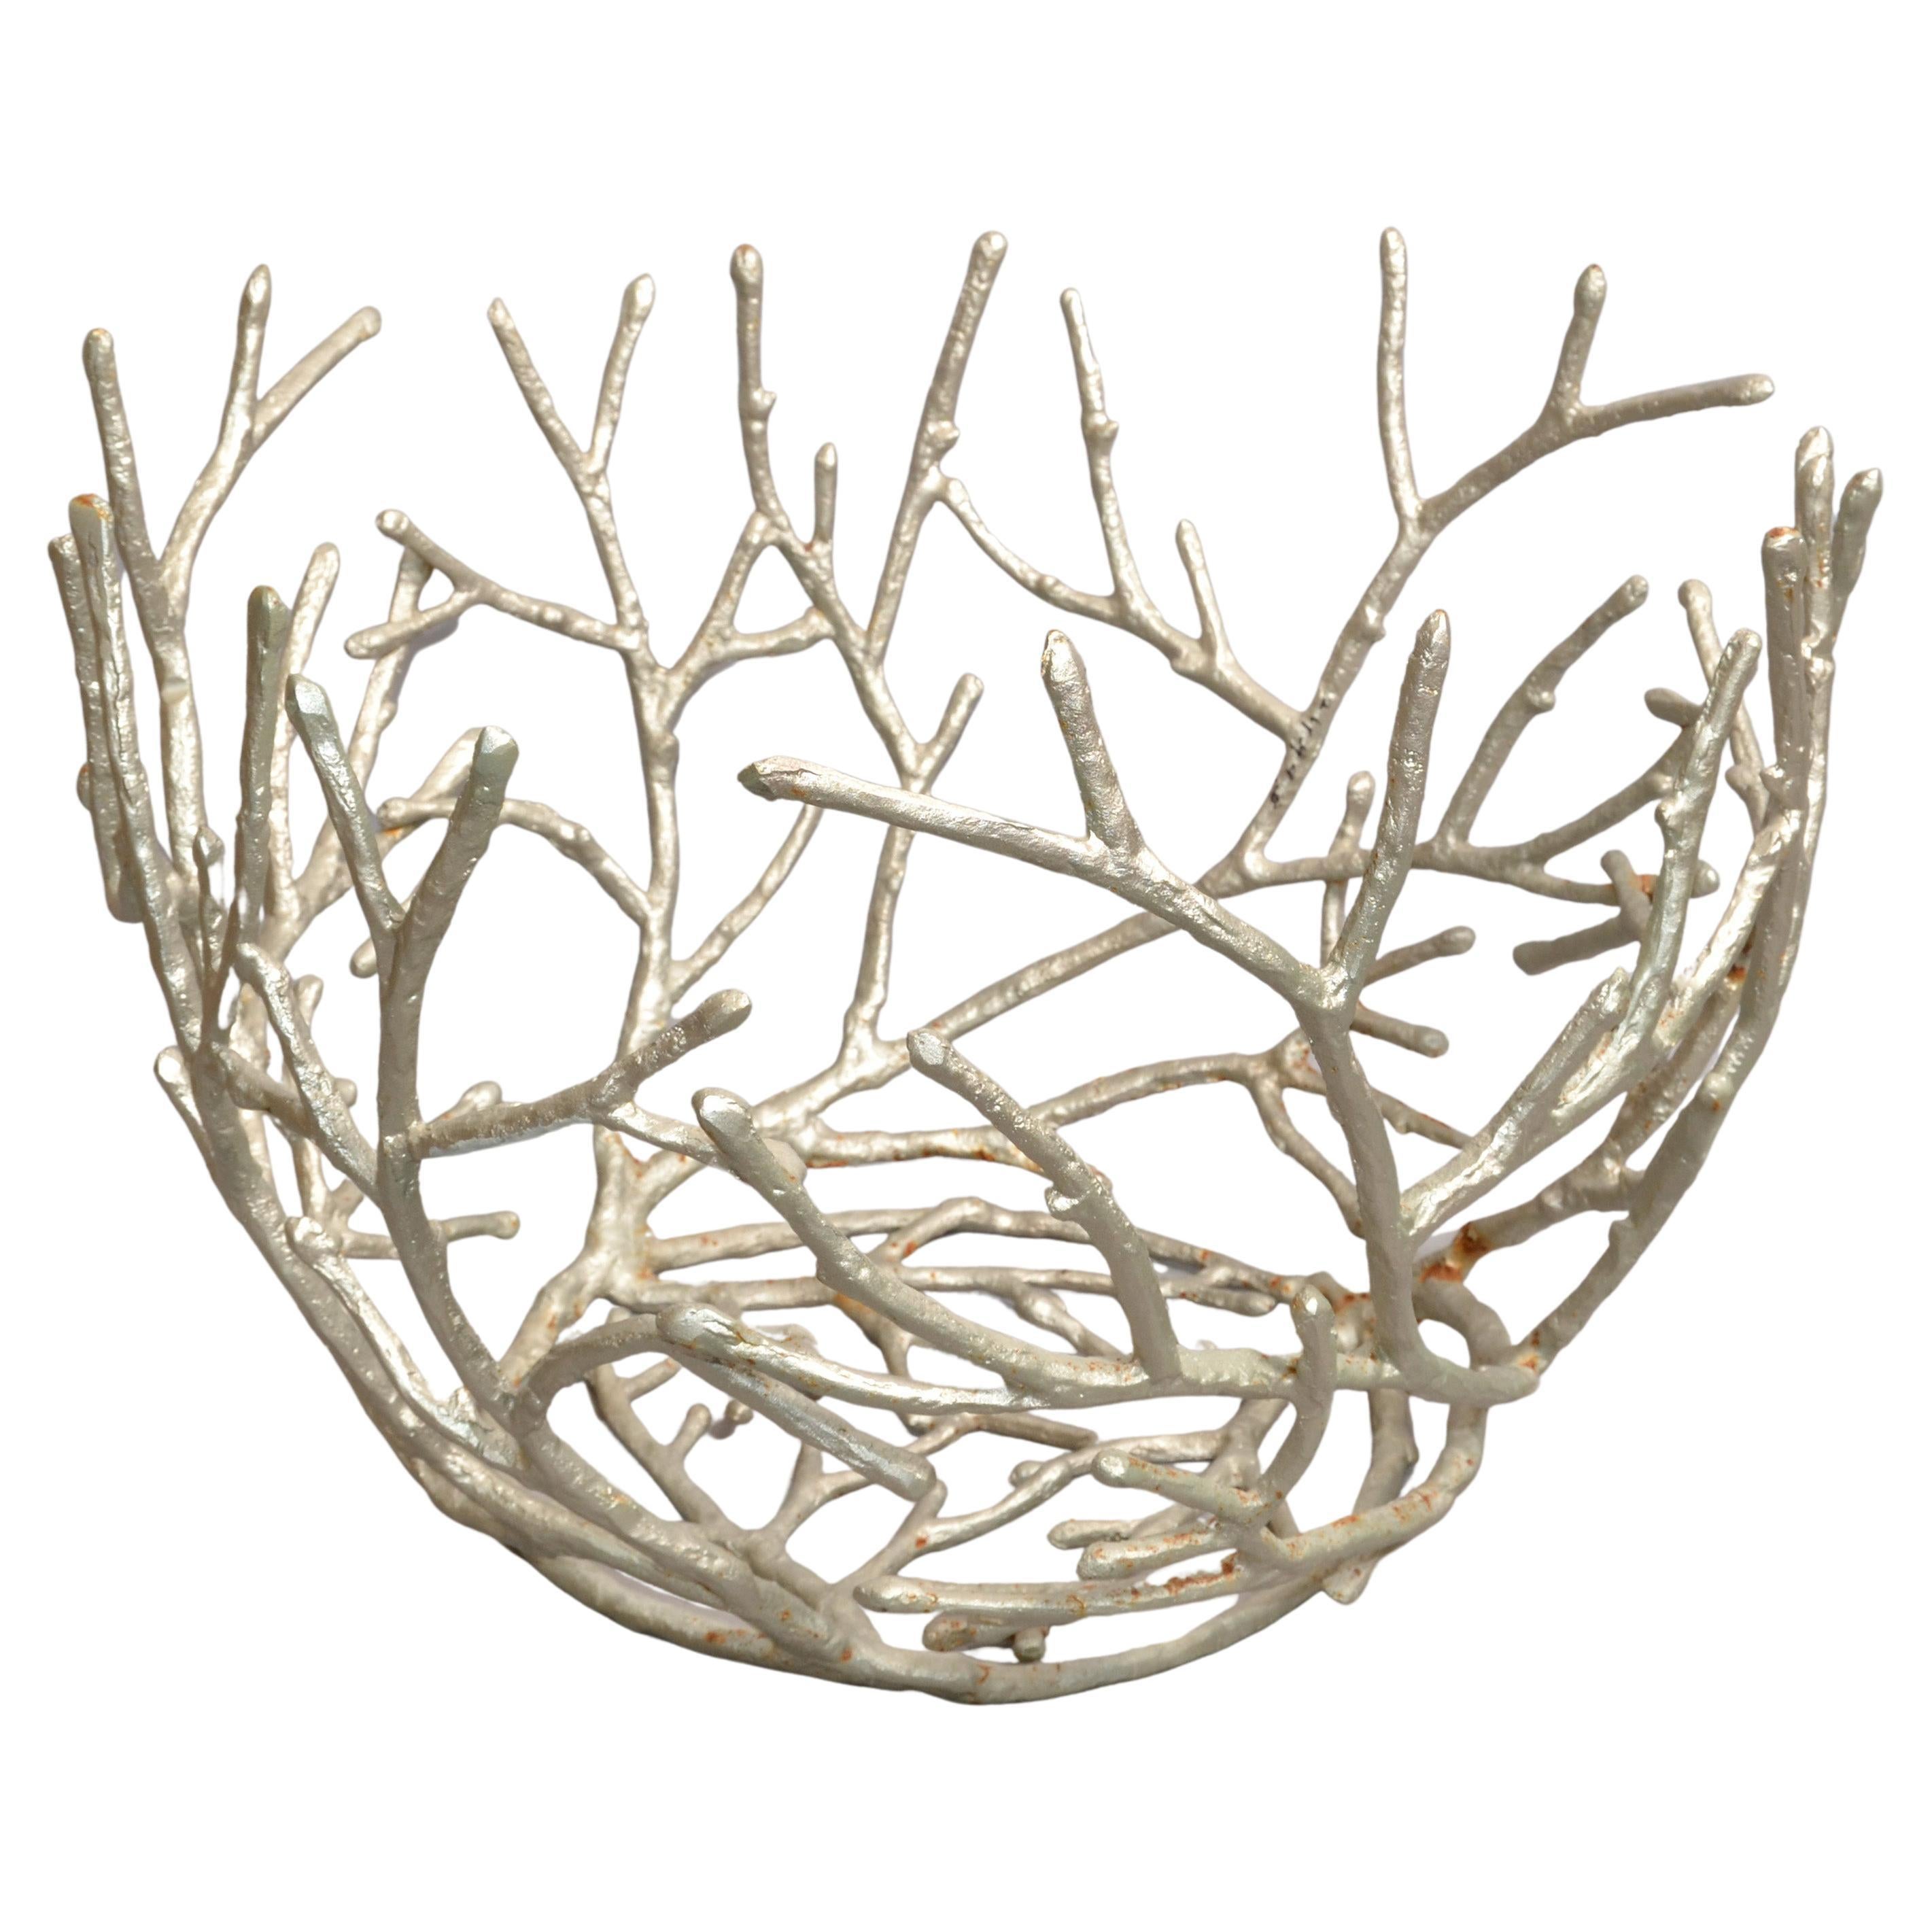 1970s, Sculptural Organic Coral Shaped Distressed Silver Finish Aluminum Planter For Sale